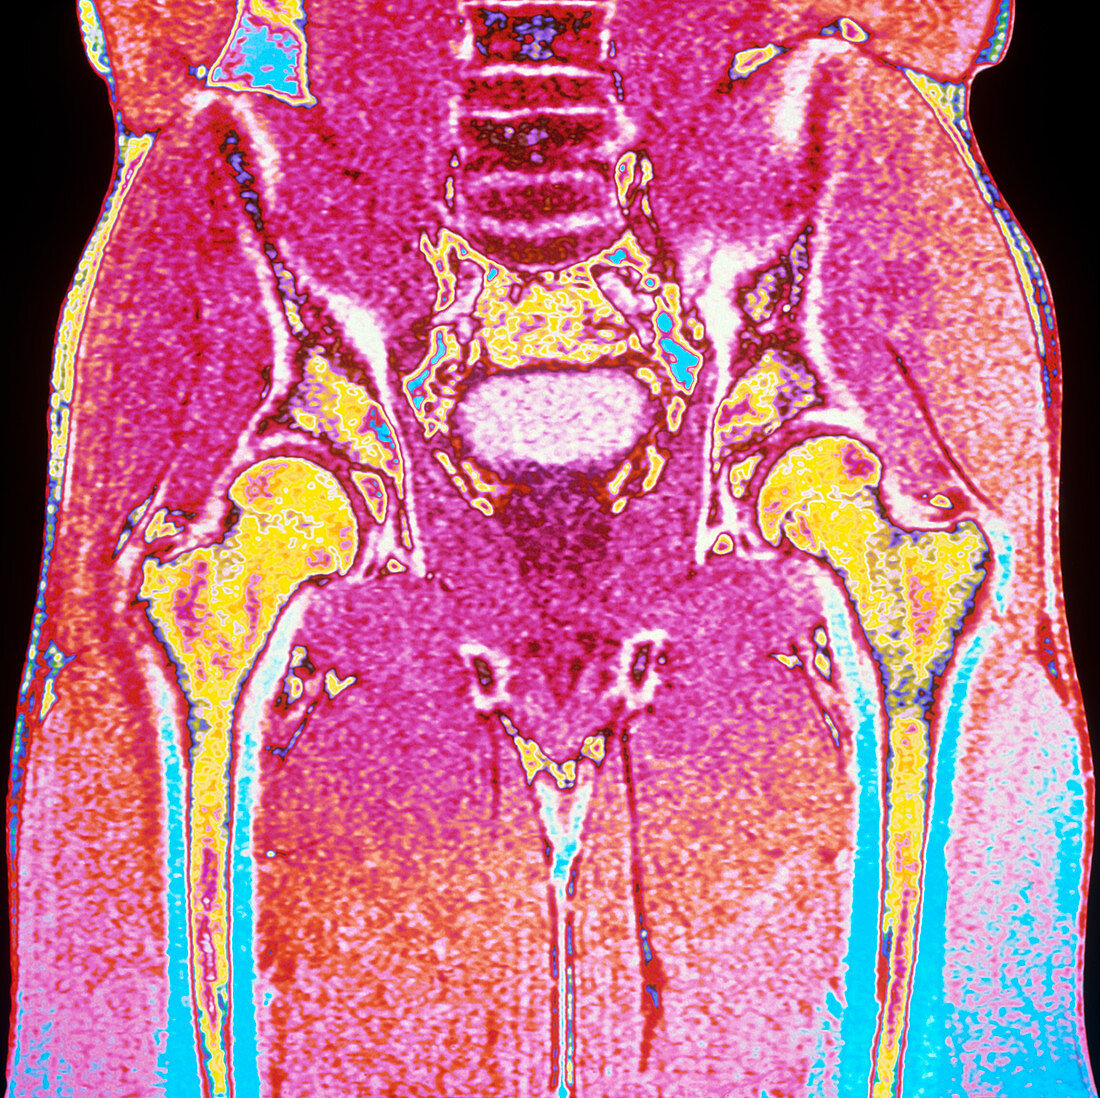 Coloured MRI scan of section through a man's hips